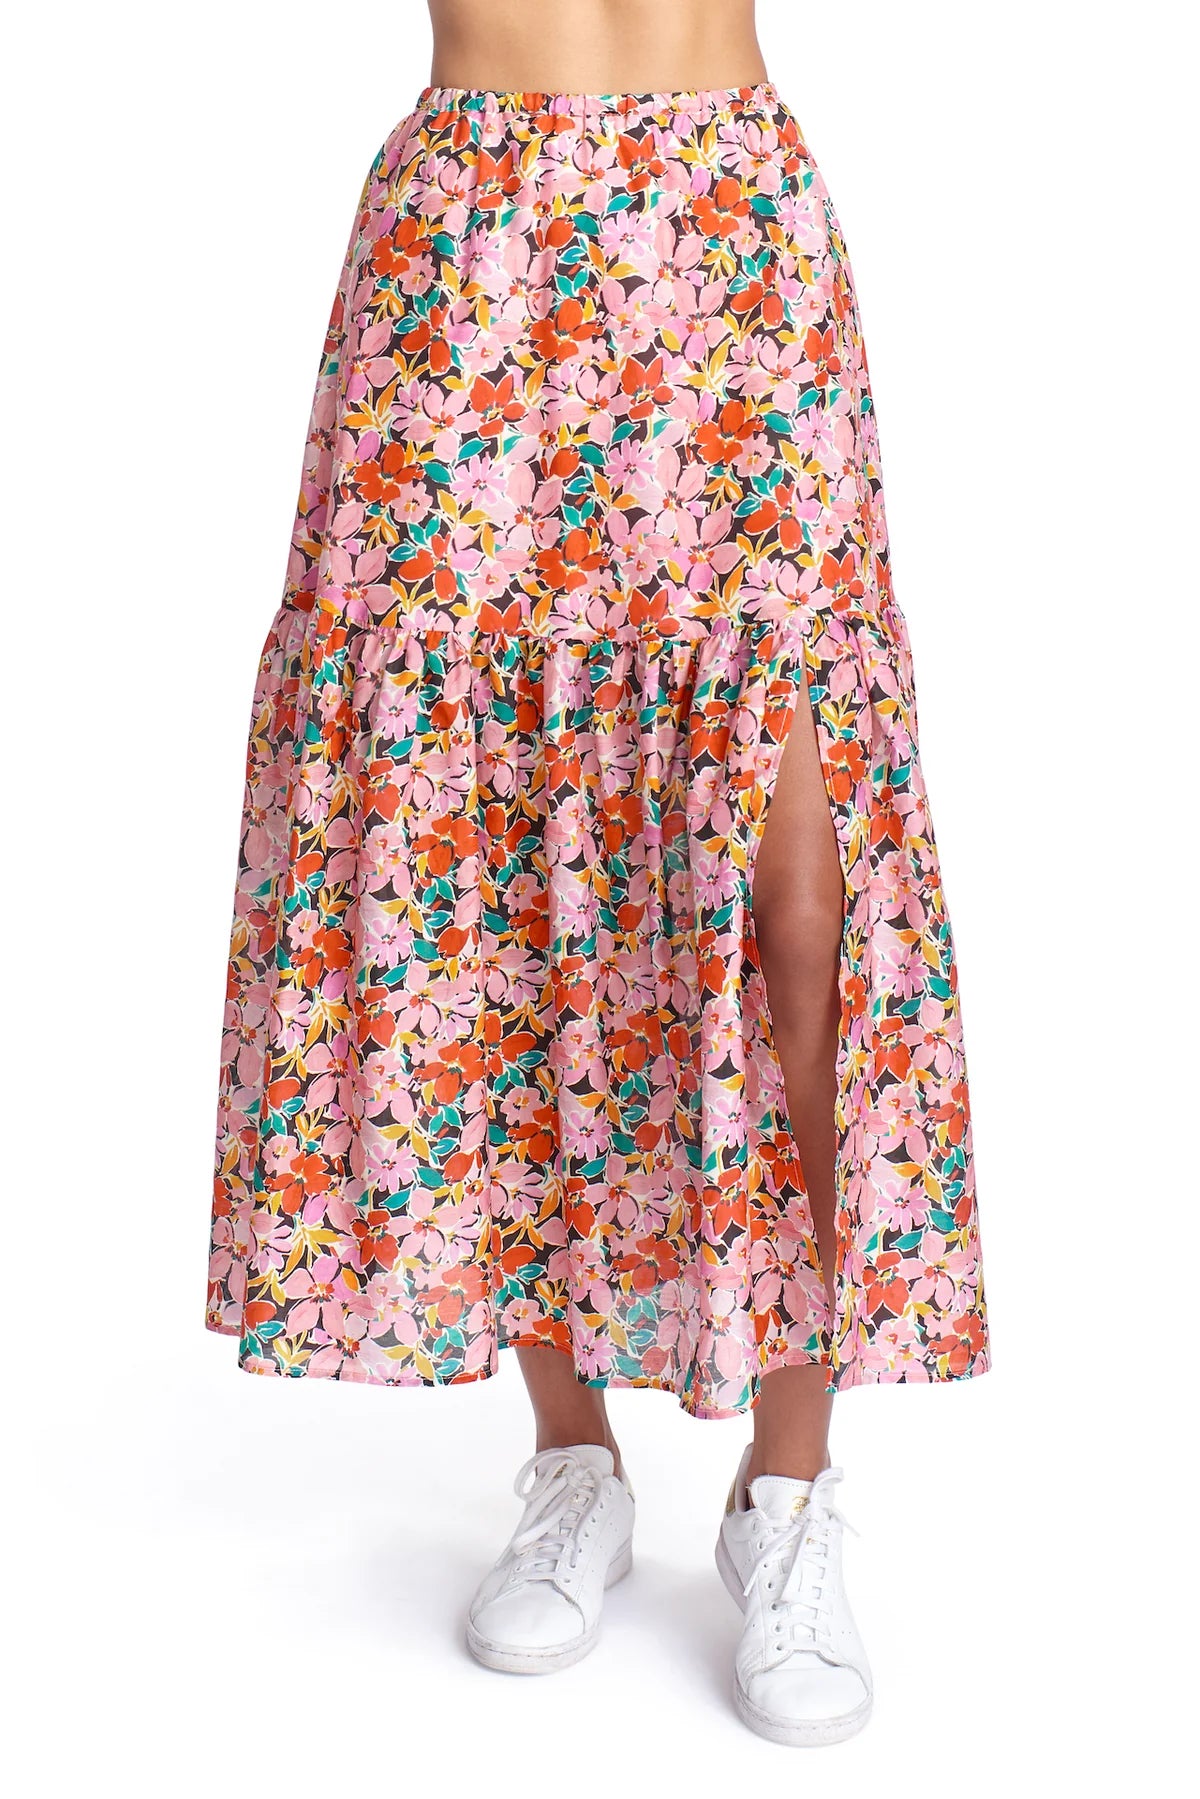 Corey Lynn Calter Lucca Skirt in Multi or Ivory - clever alice